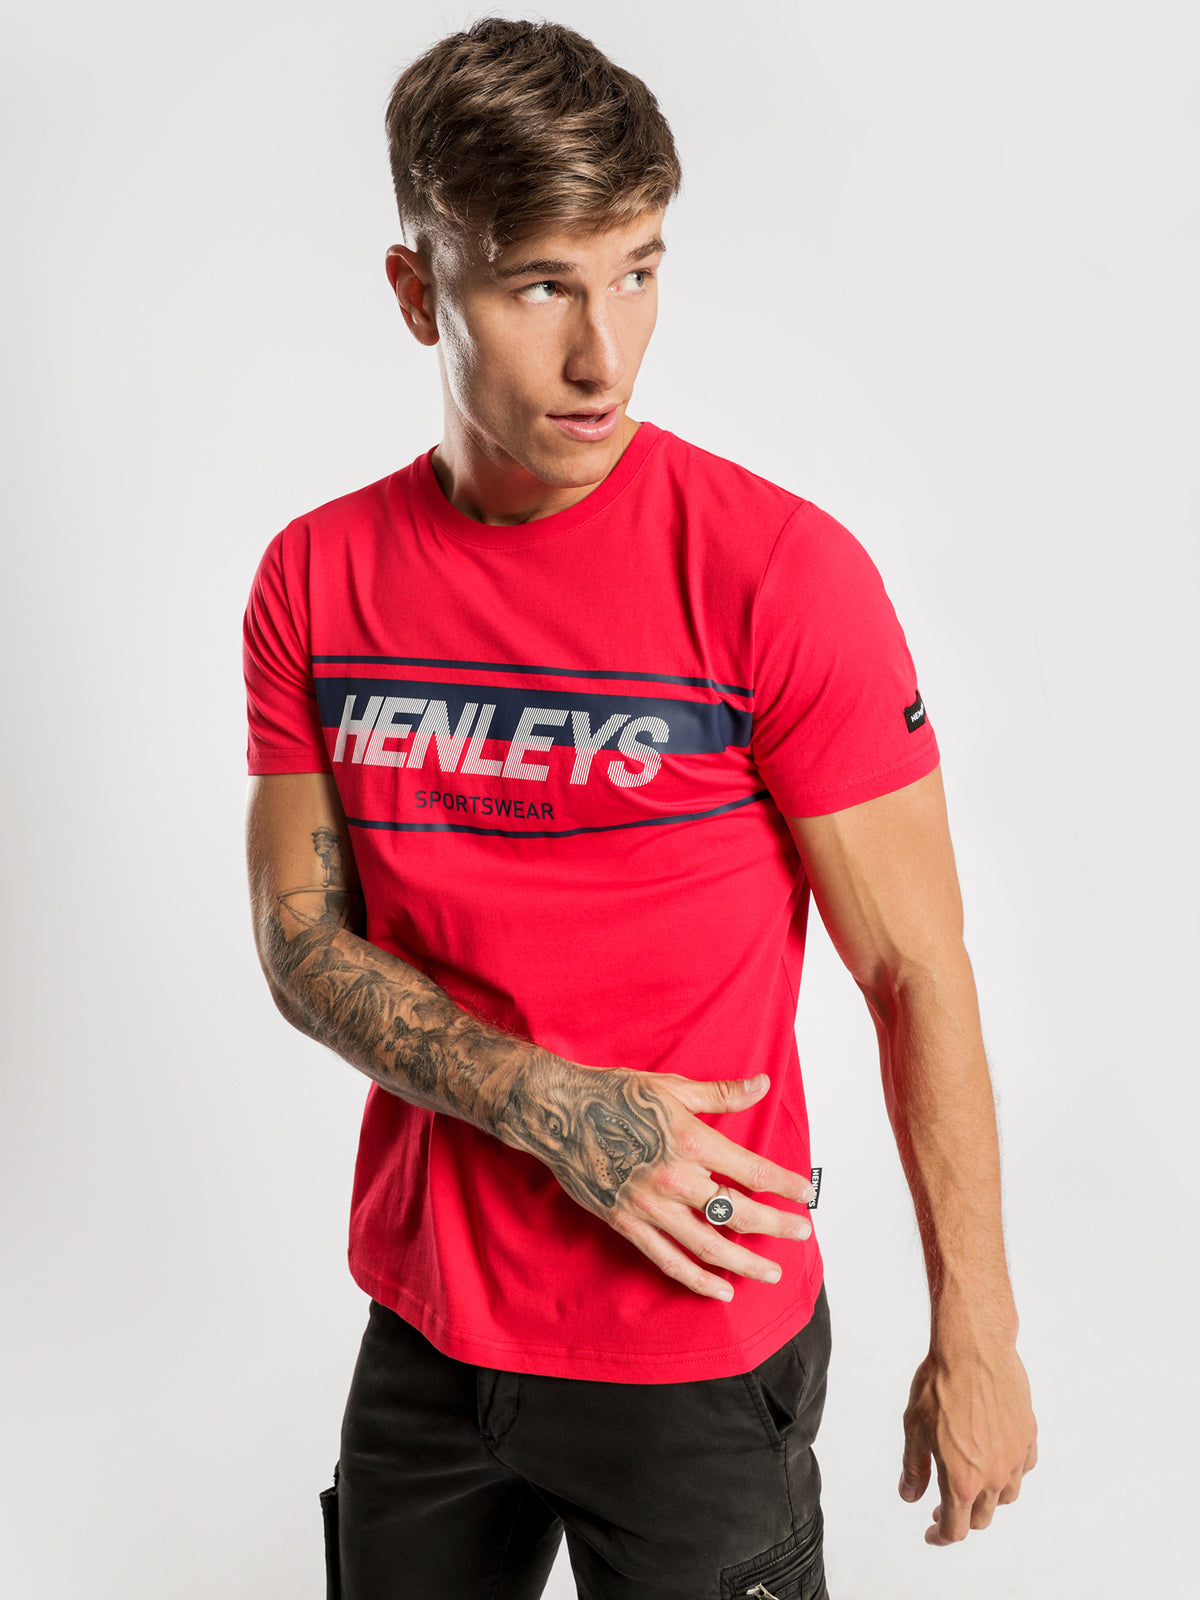 Jenkins T-Shirt in Fire Red